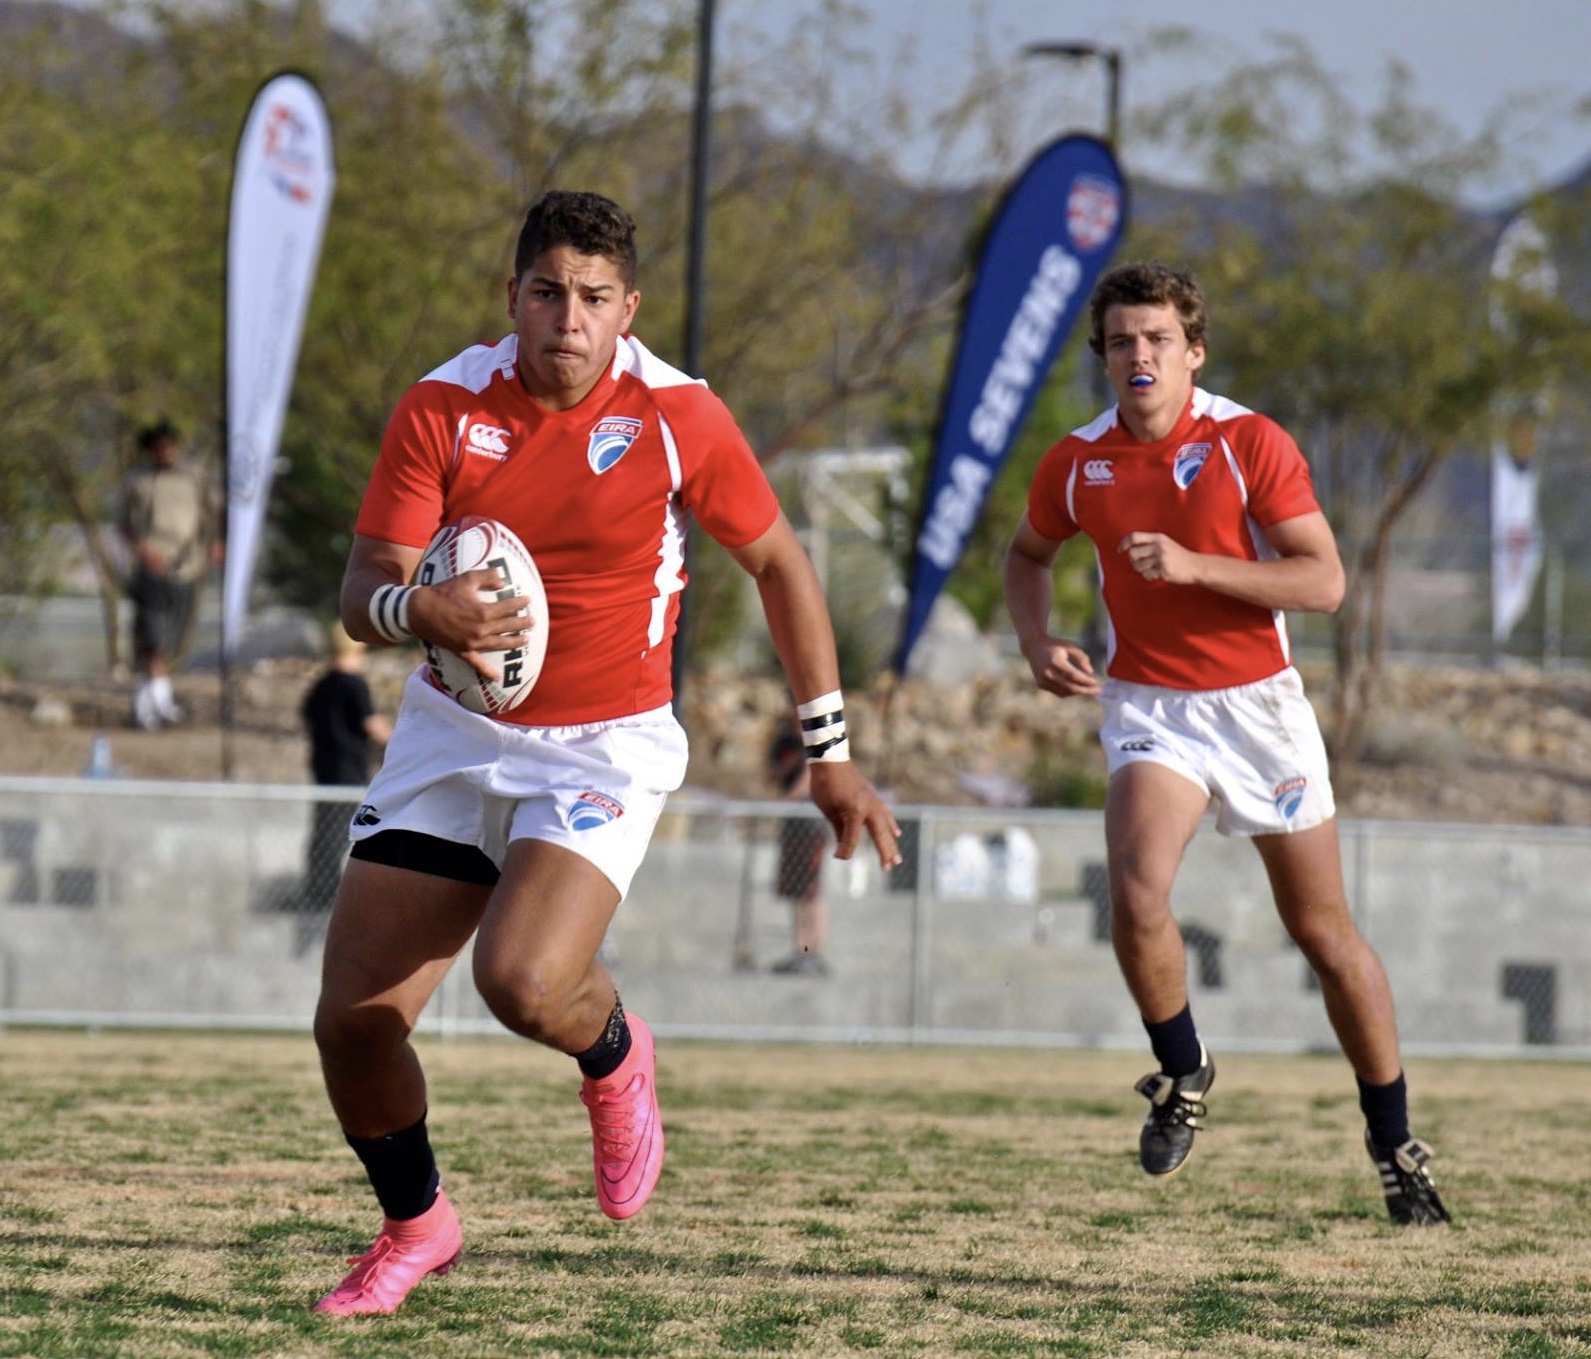 Quinn Perry and Christian Newby Eagle Impact Rugby Academy. Heide Newby photo.